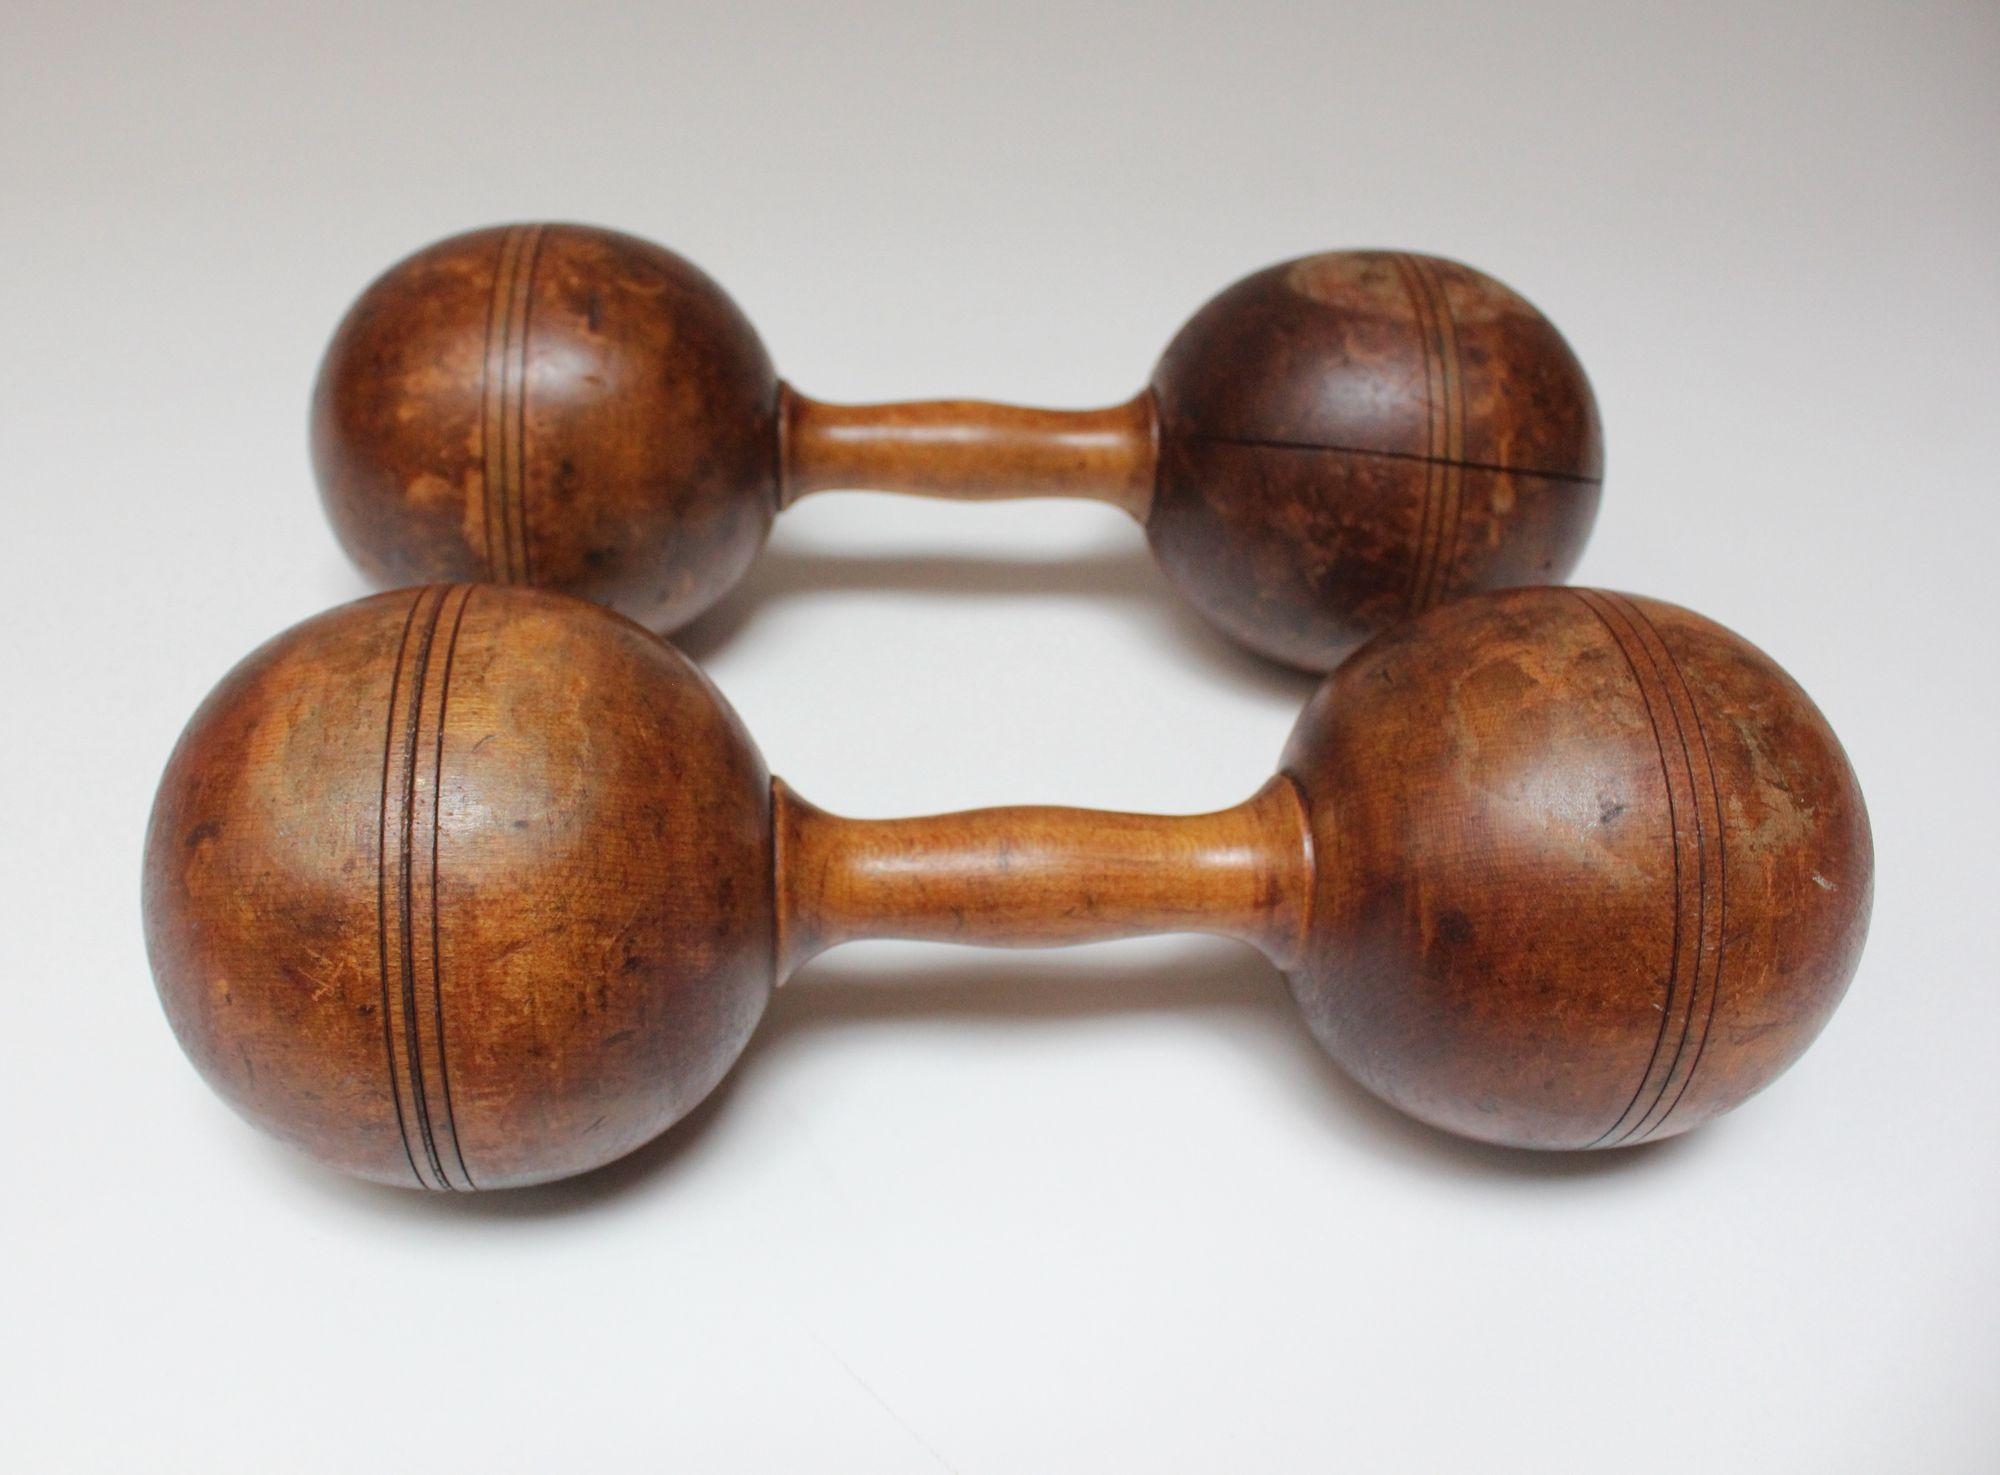 Hand-carved dumbbells, each from one continuous piece of wood accented with carved lines (circa 1930s, USA).
Natural toned wood, perfectly aged with rich patina/soiling/splits from age and use. Beautiful tabletop decorative objets d'art.
Relatively